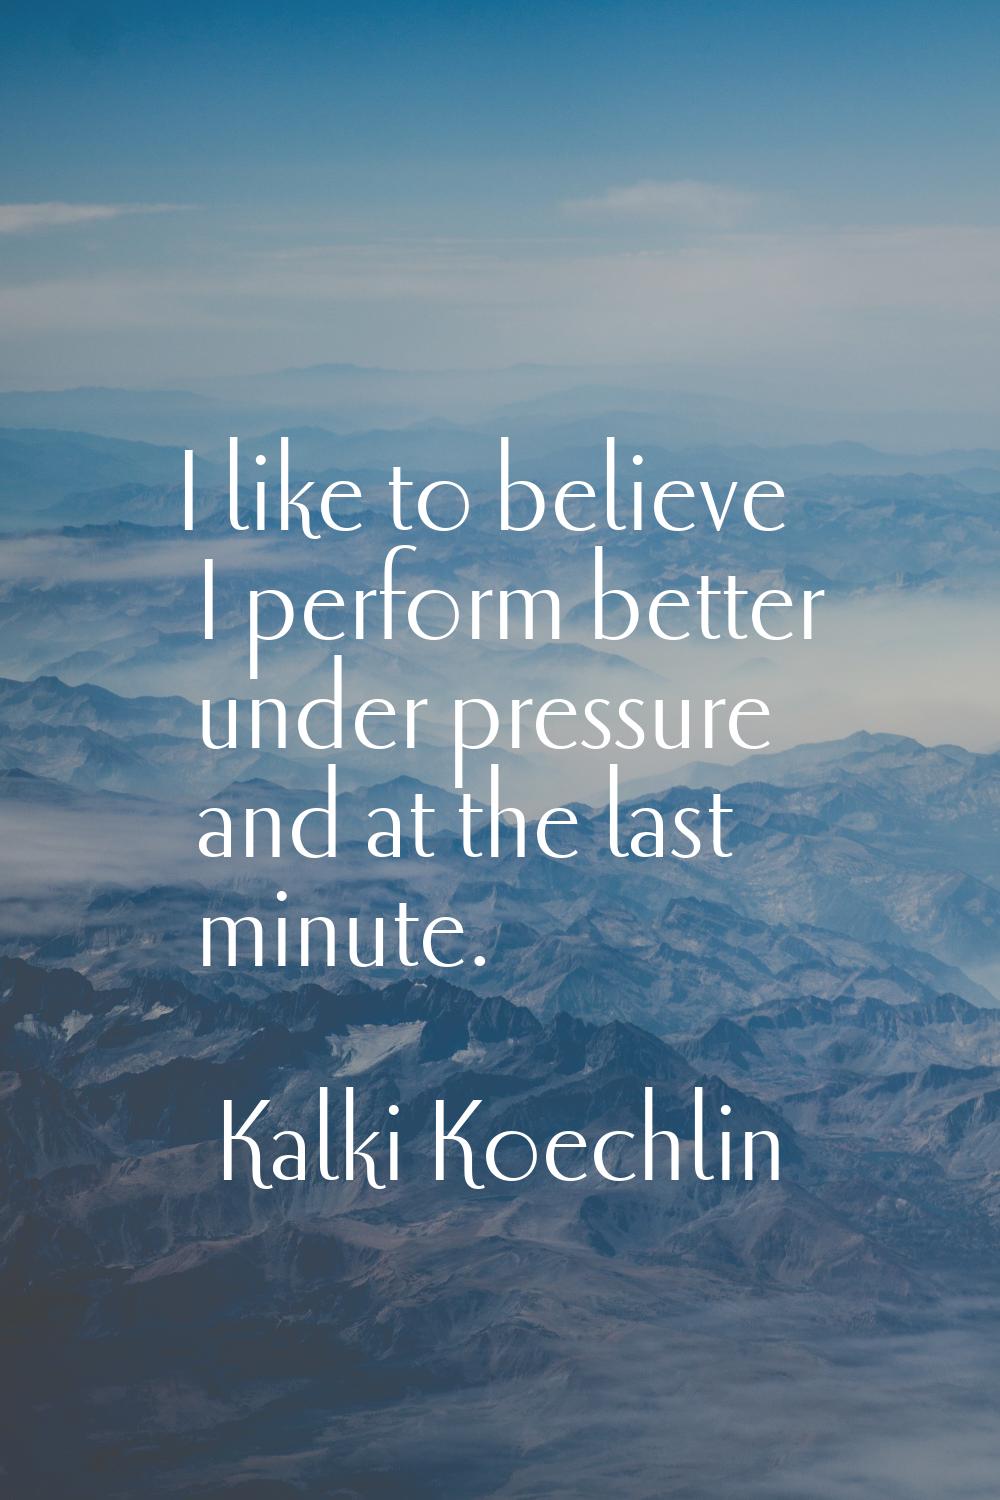 I like to believe I perform better under pressure and at the last minute.